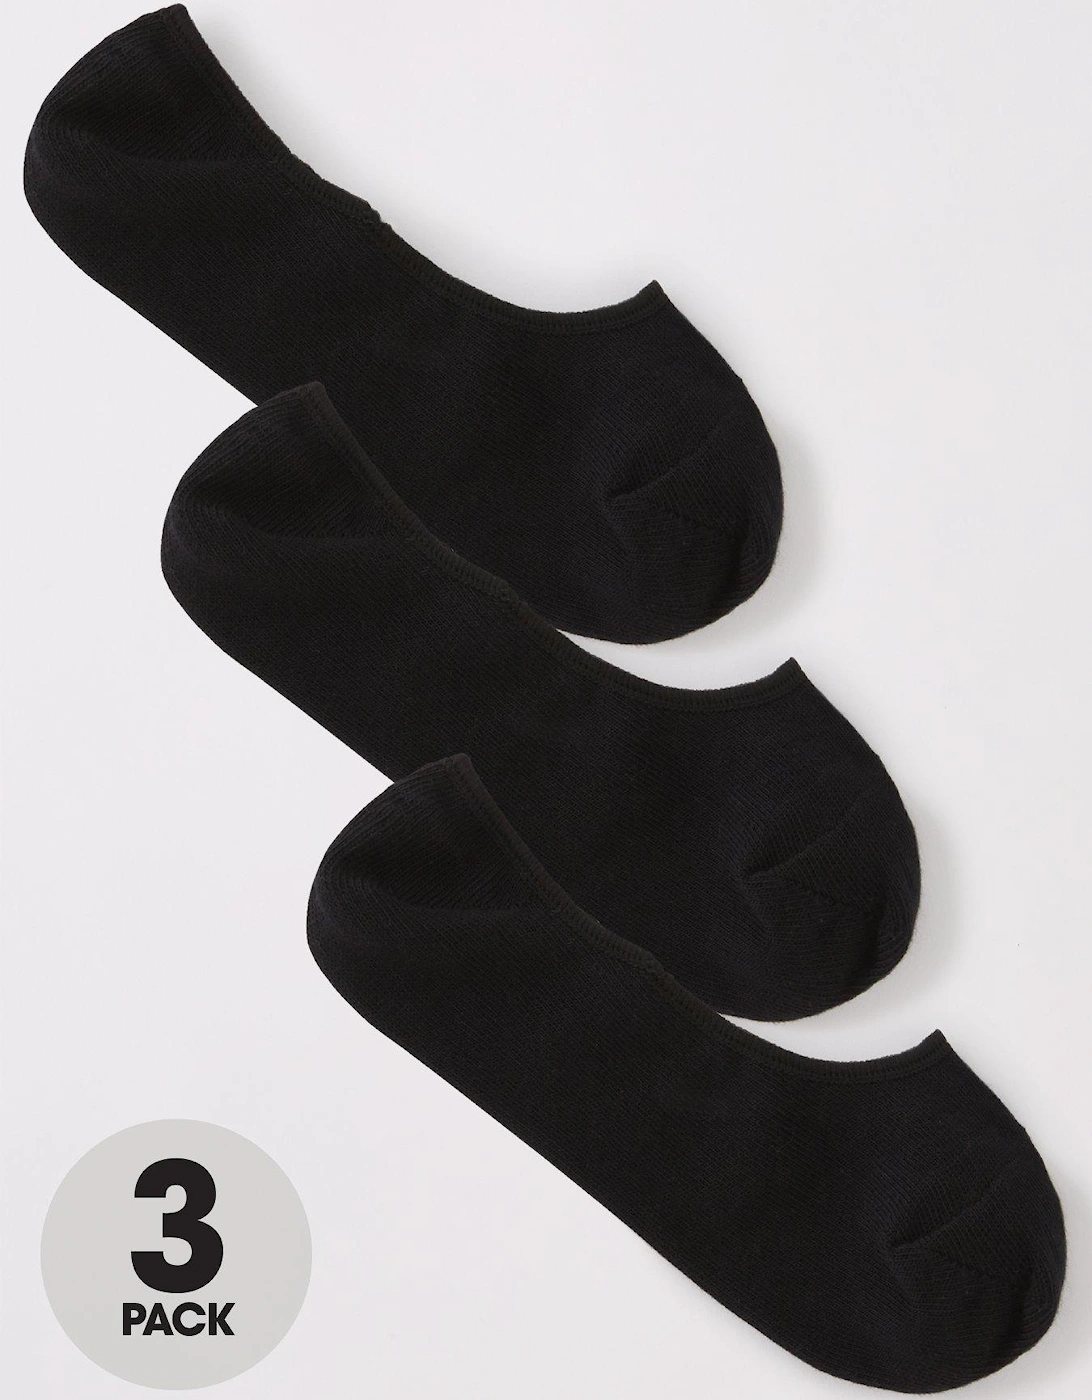 3 Pack of Invisible Trainer Liner Socks With Heel Grips - Black, 2 of 1